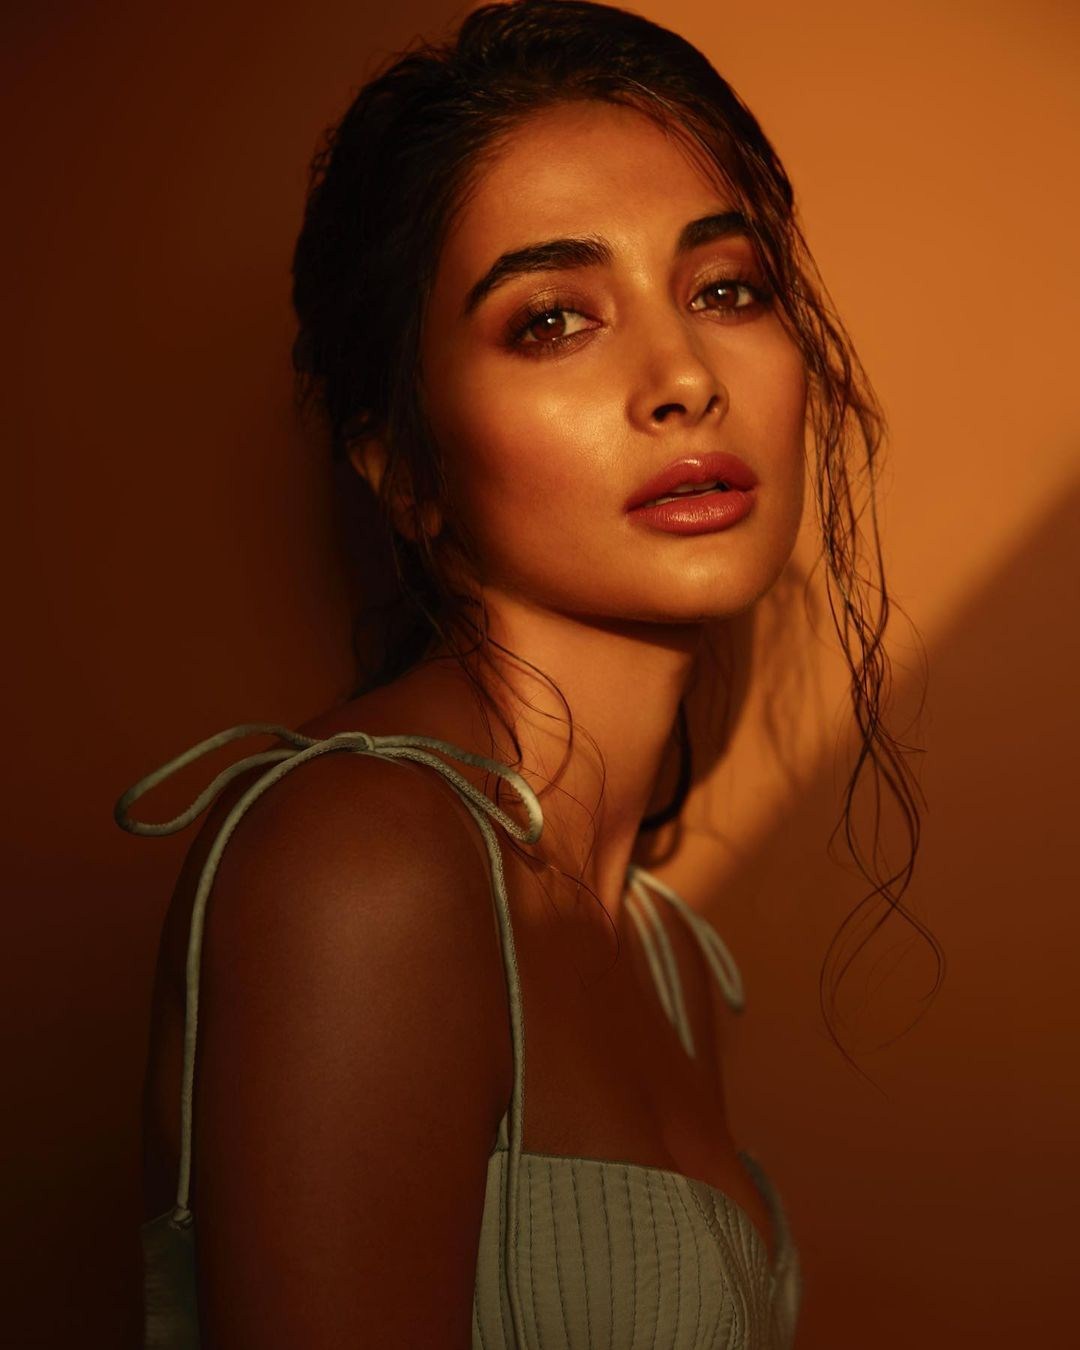 Tollywood gorgeous beauty pooja hegde latest selfie images-Actresspooja, Pooja Hegde, Poojahegde, Sonam Bajwa, Tollywoodpooja Photos,Spicy Hot Pics,Images,High Resolution WallPapers Download